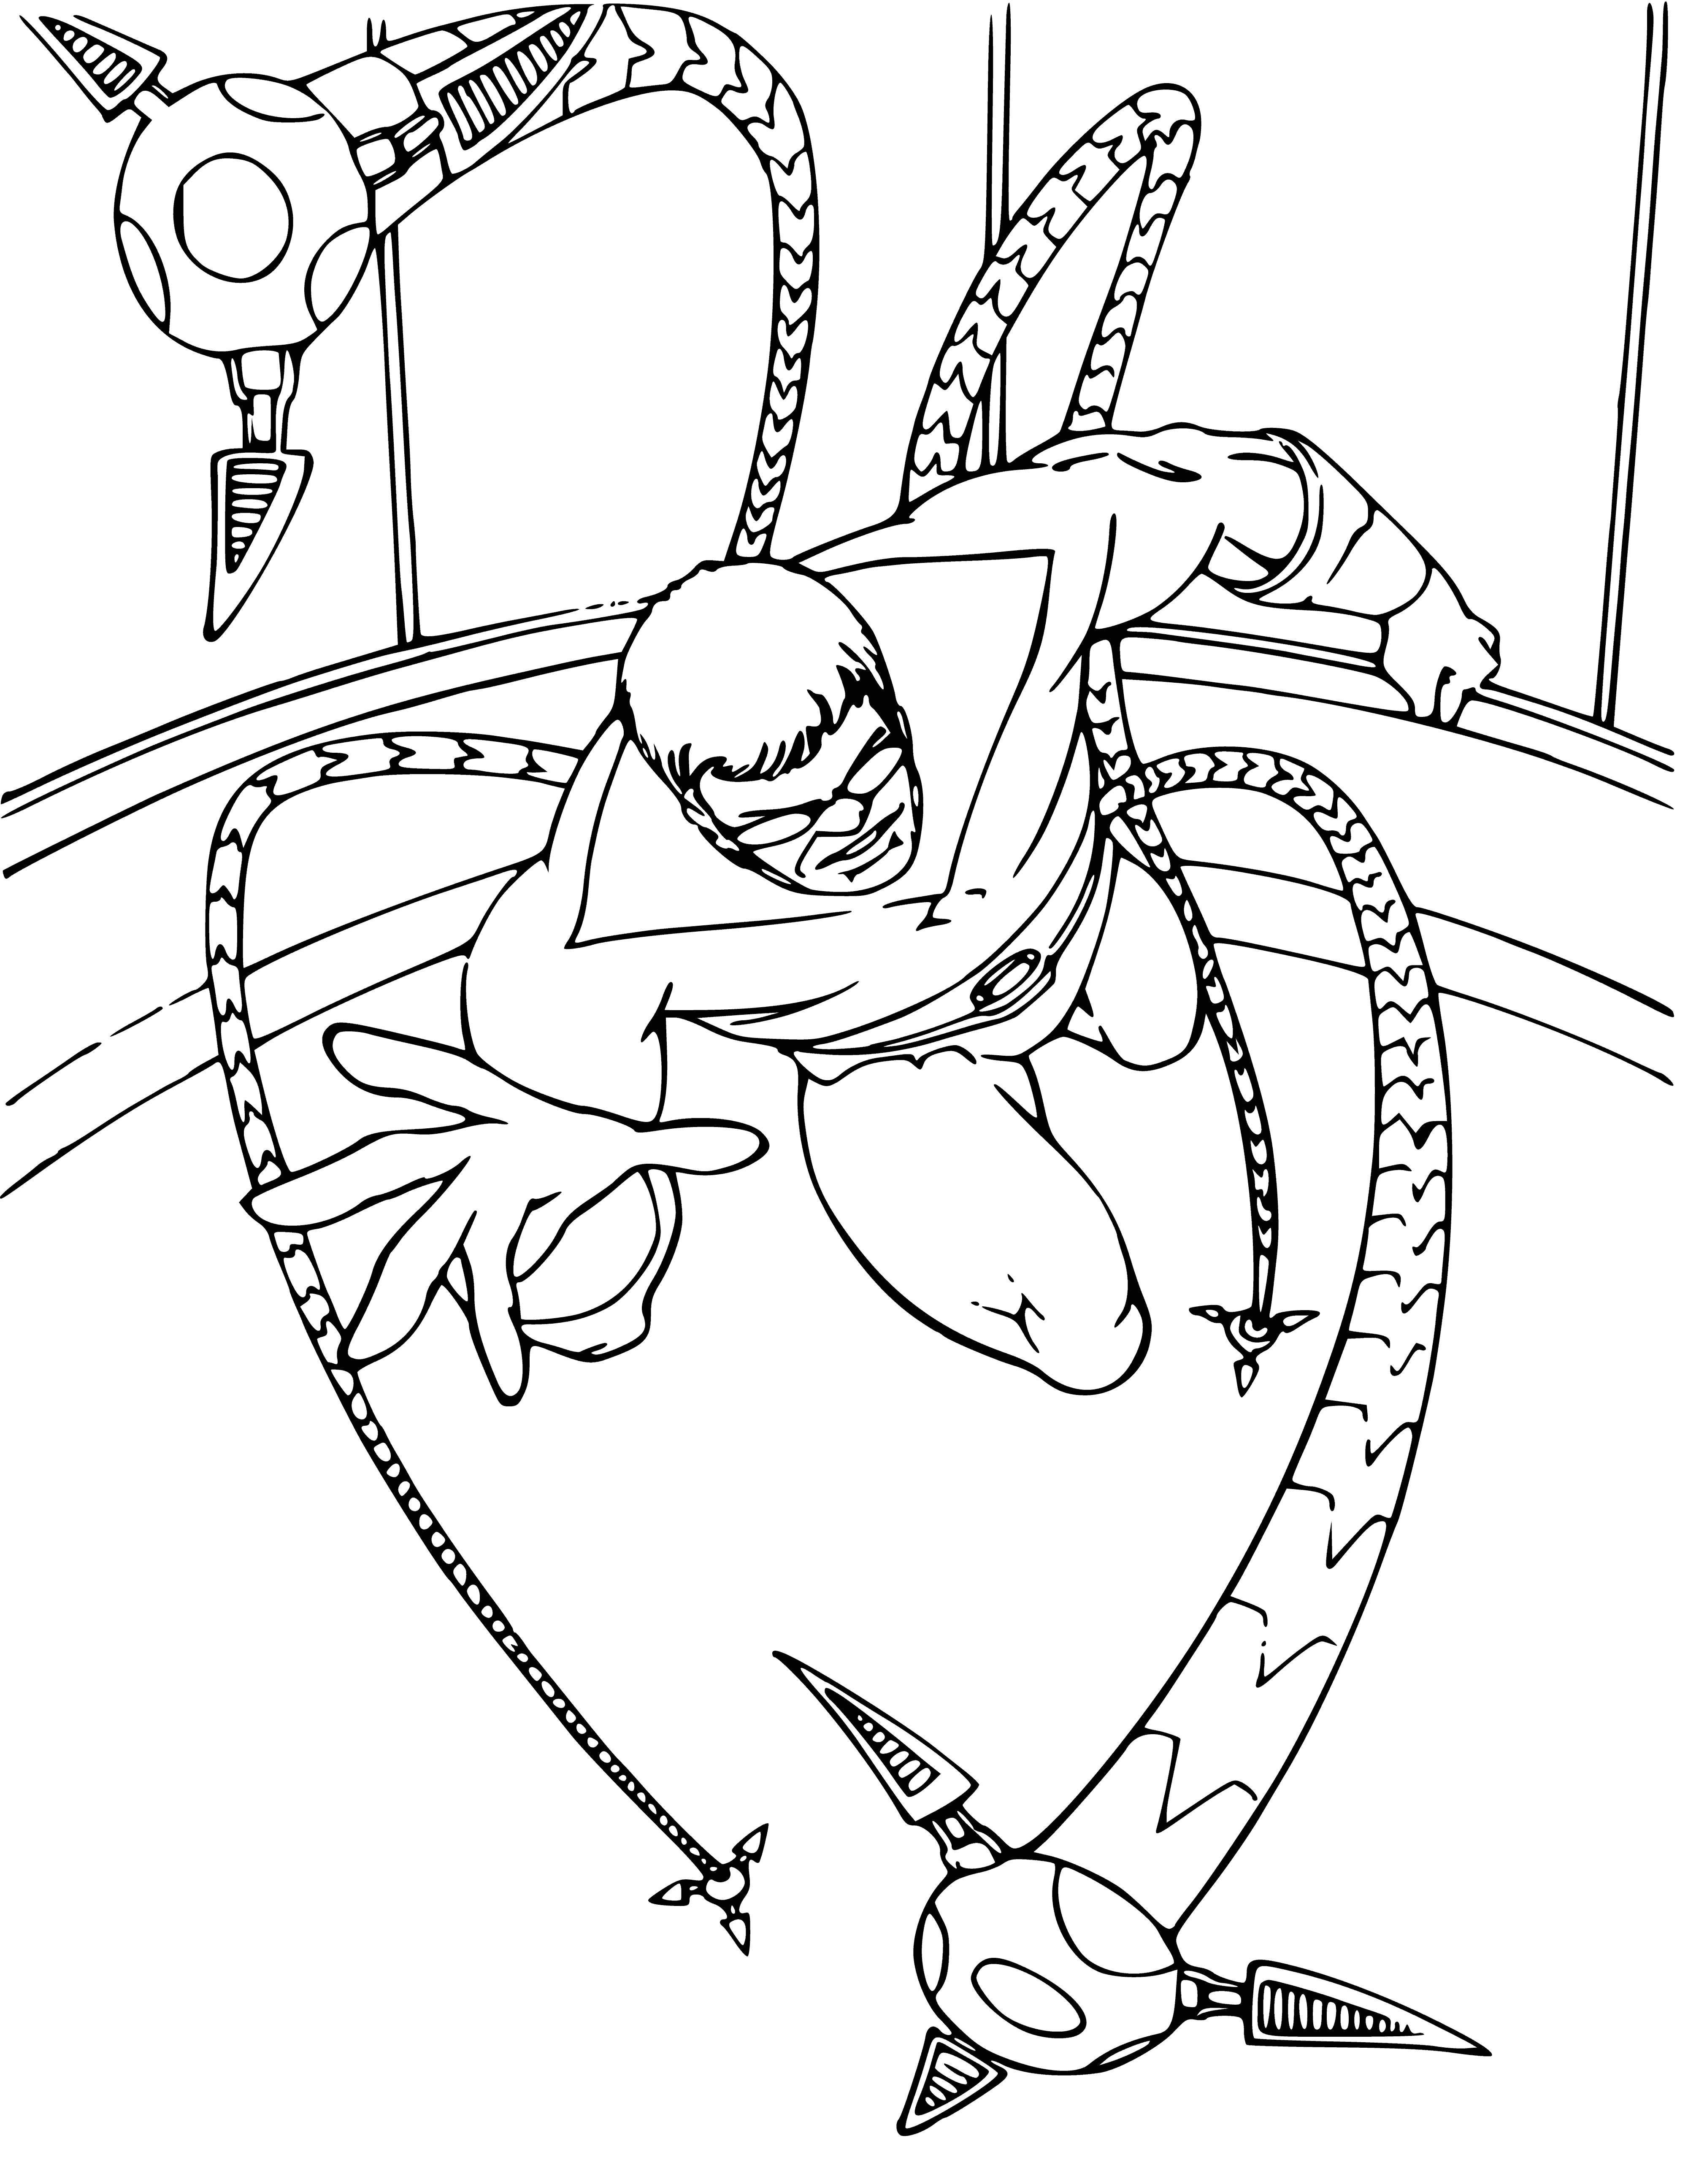 Doctor Octopus coloring page